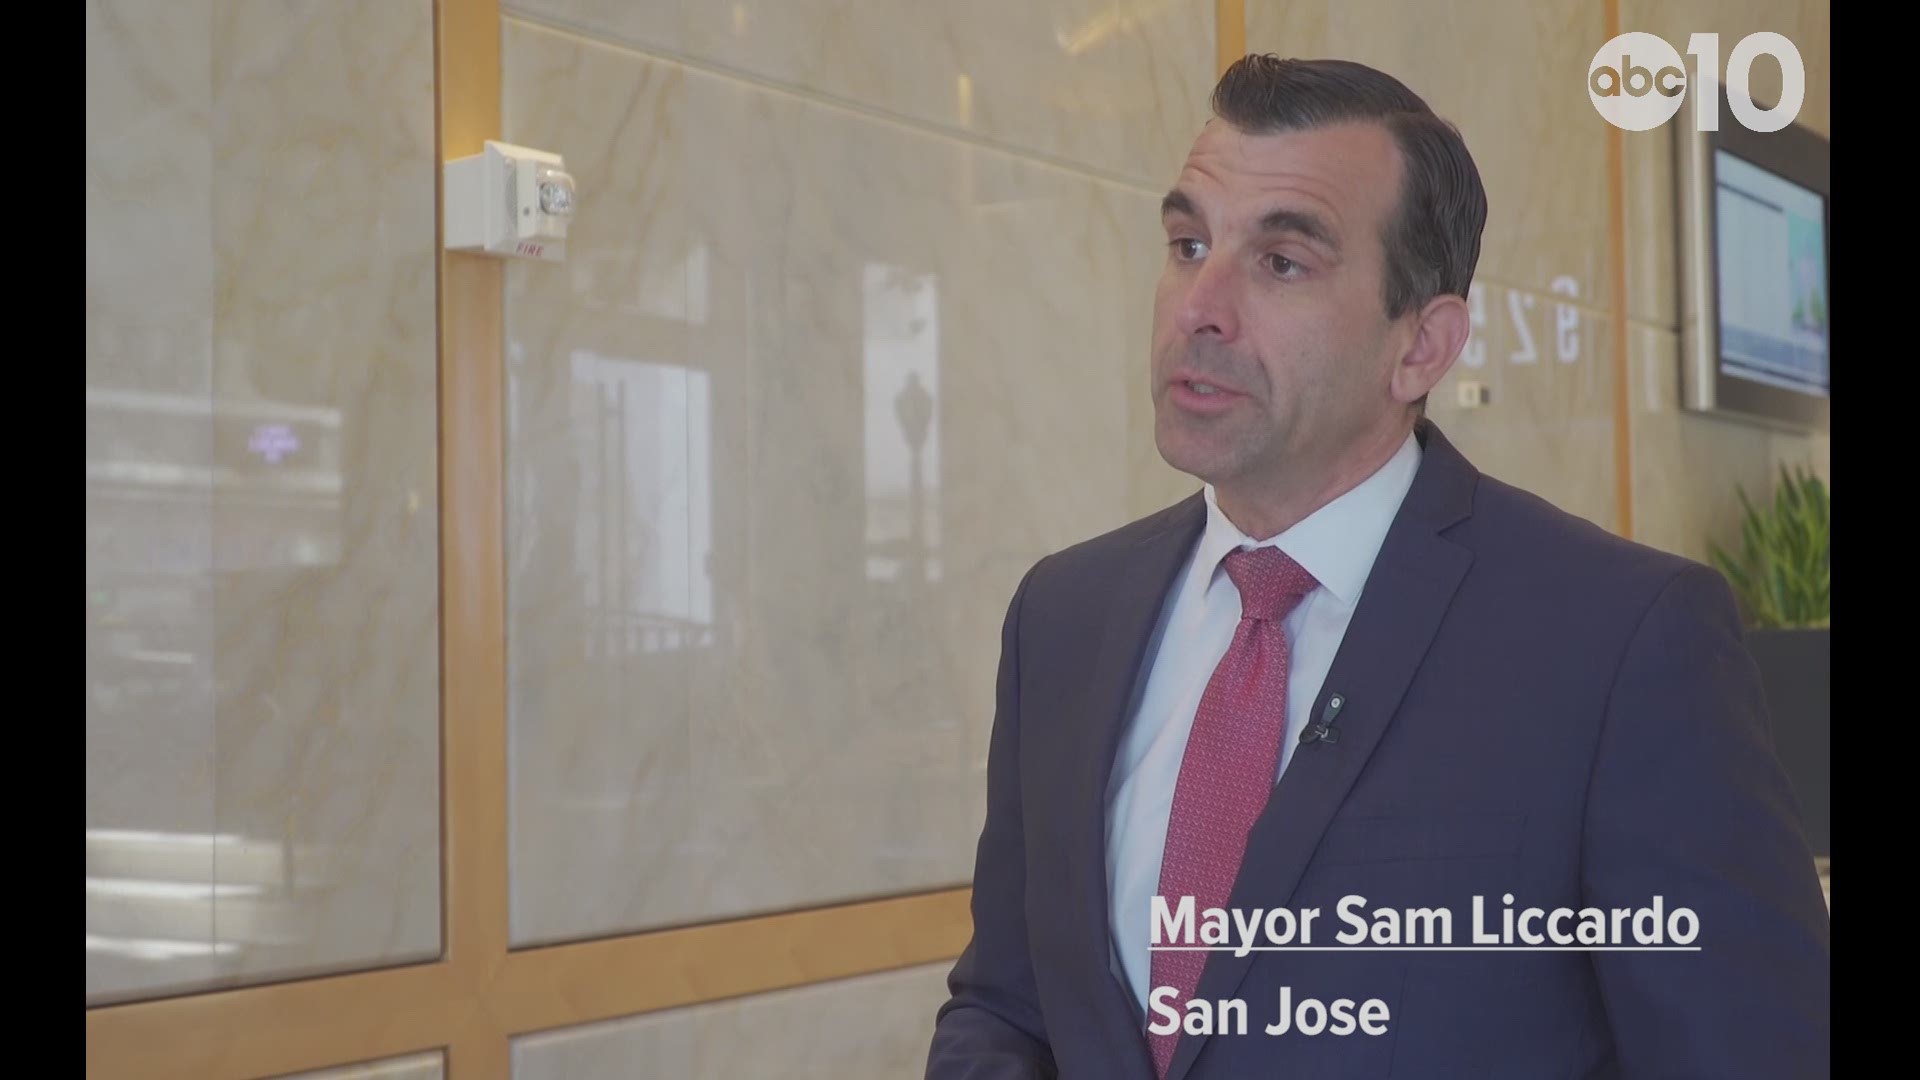 San Jose Mayor Sam Liccardo wants to implement a city ordinance that would require gun owners in San Jose to buy liability insurance and or pay a fee into a fund that would help recoup costs associated with gun violence.